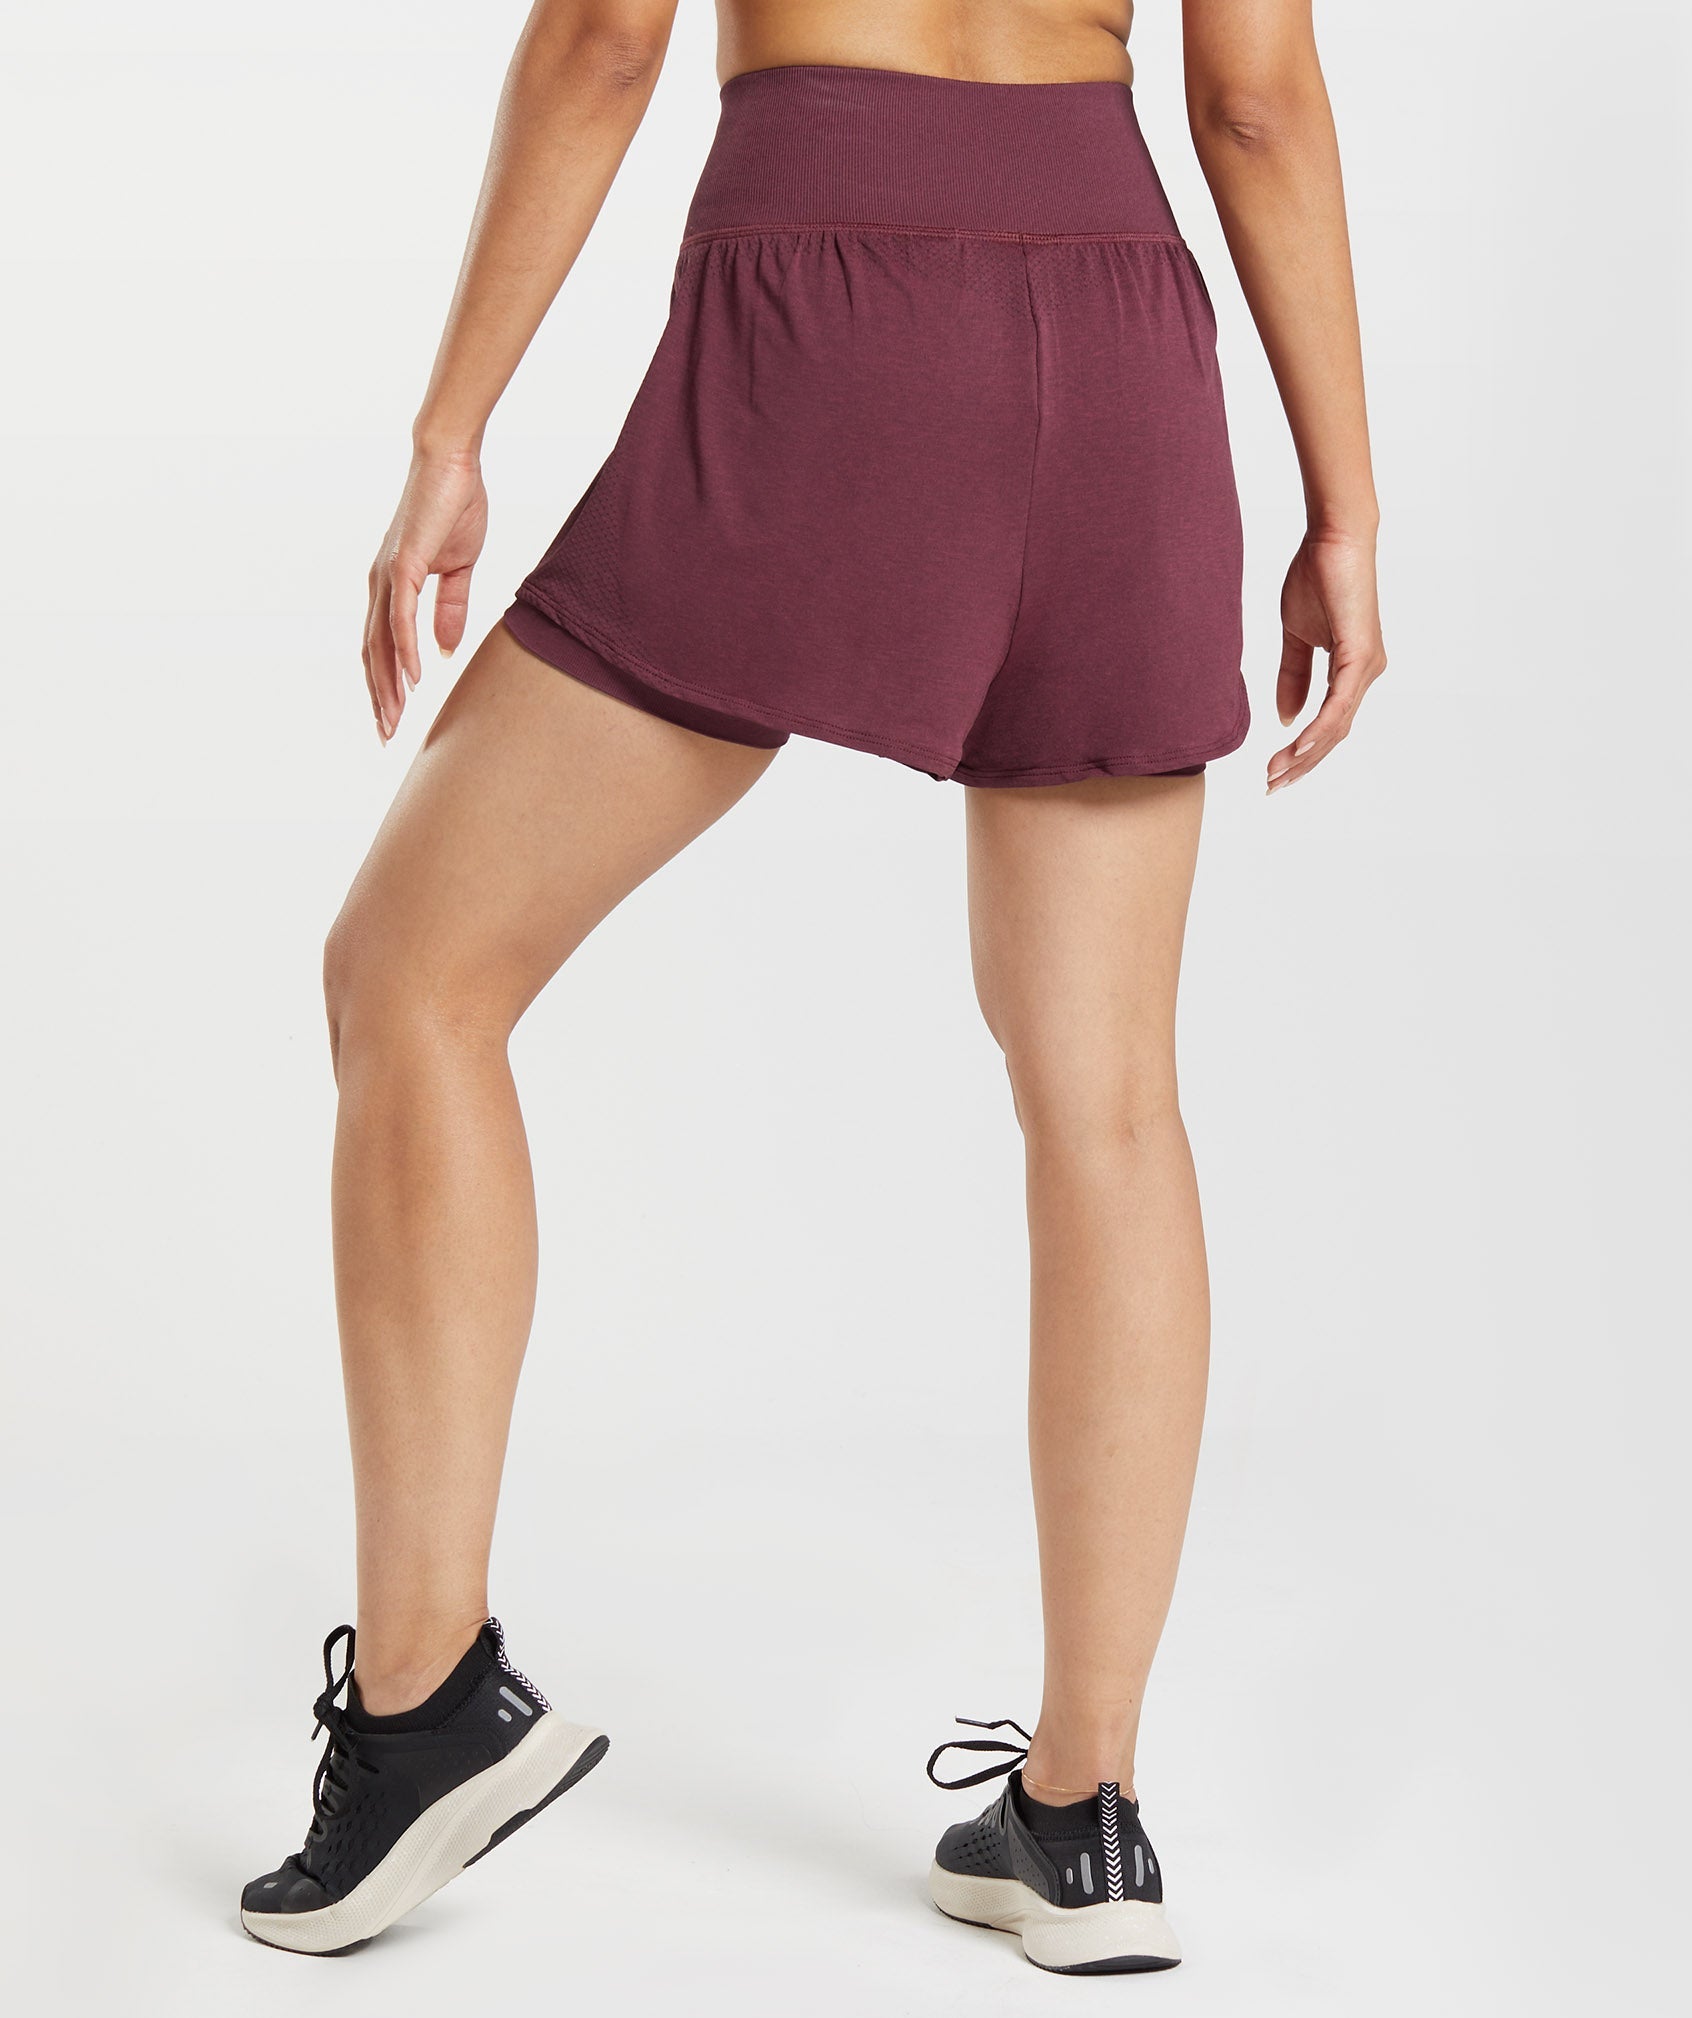 Vital Seamless 2.0 2-in-1 Shorts in Baked Maroon Marl - view 2